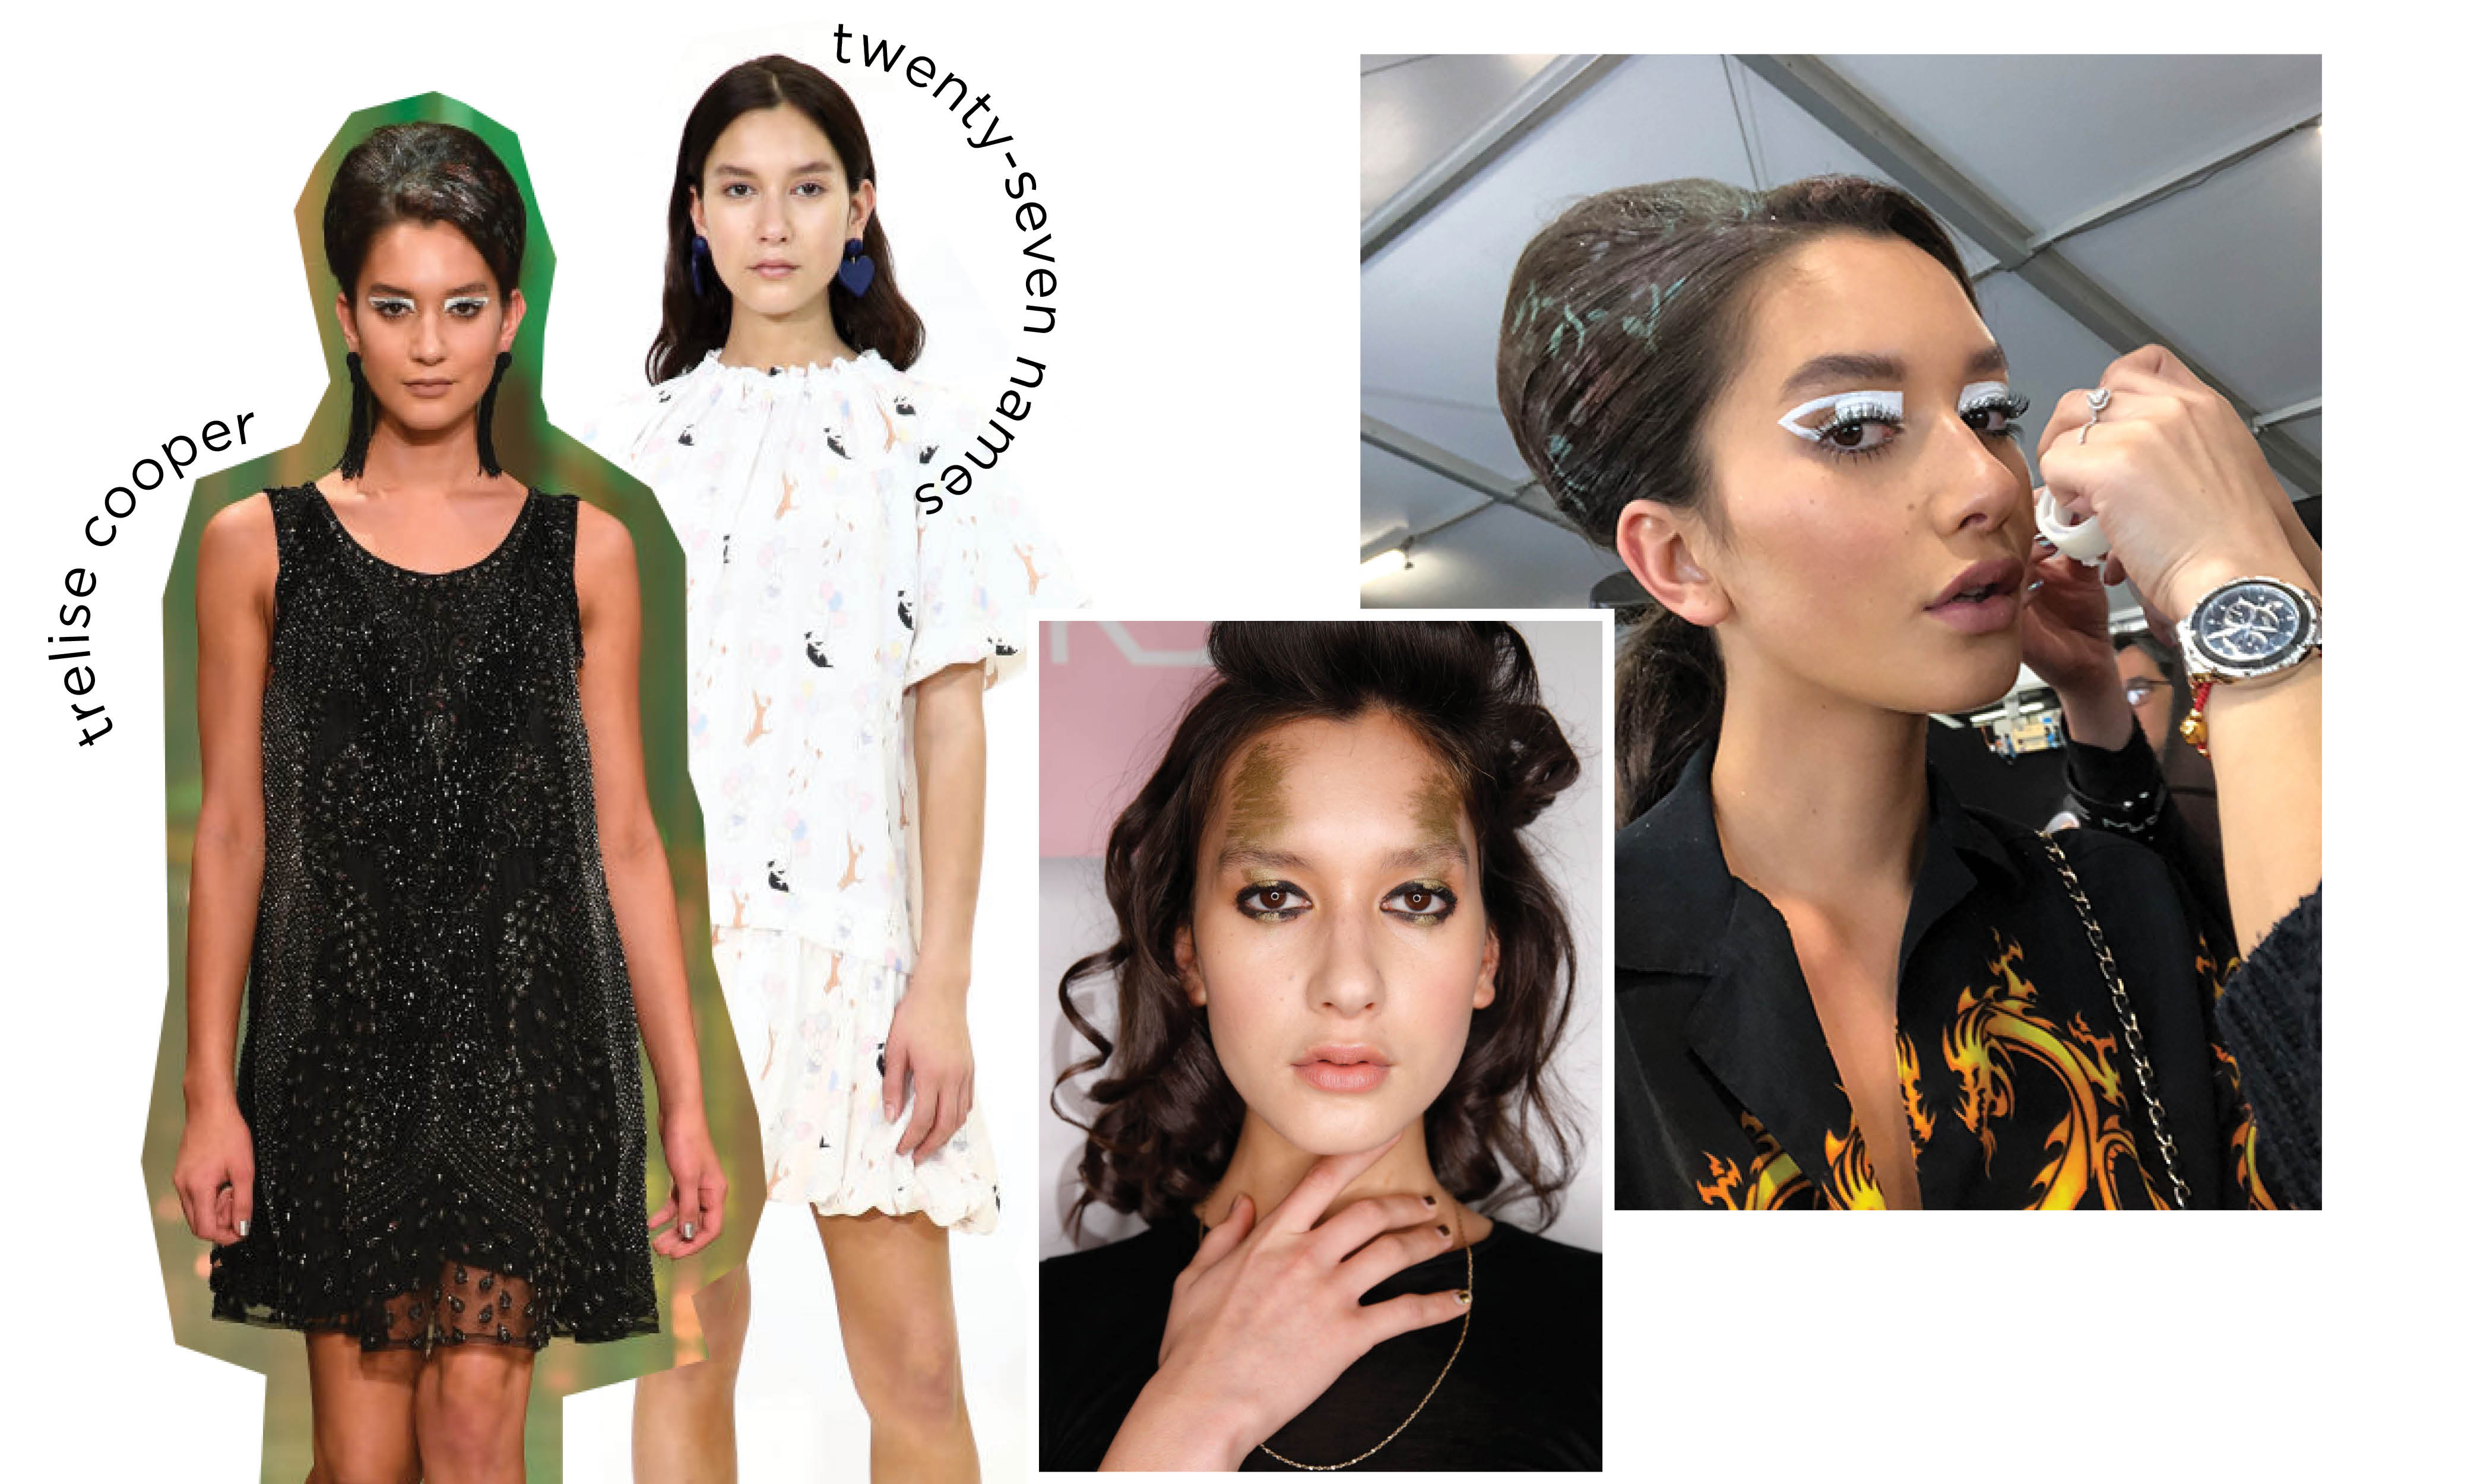 Manahou-mackay-Backstage-Beauty-Diary_1000x600_collagejpg